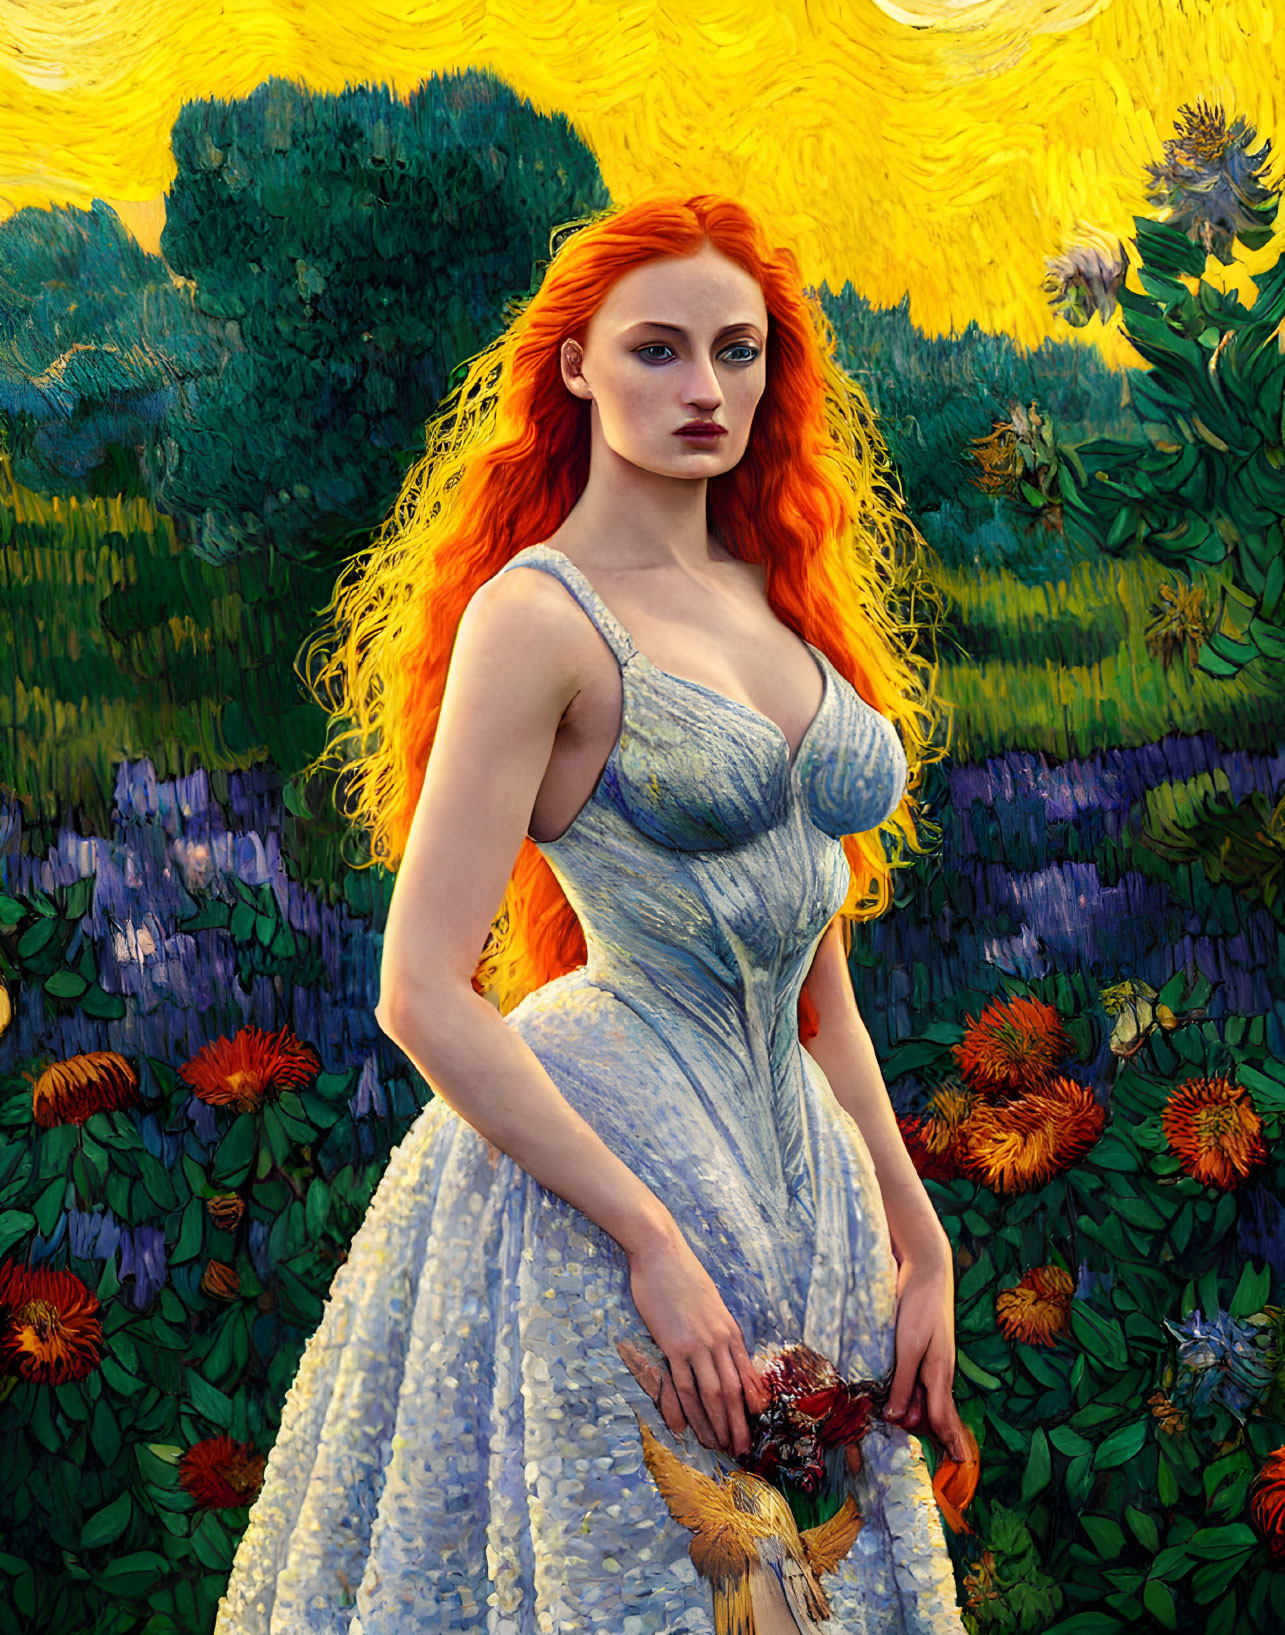 Red-haired woman in white dress with bird in vibrant floral field